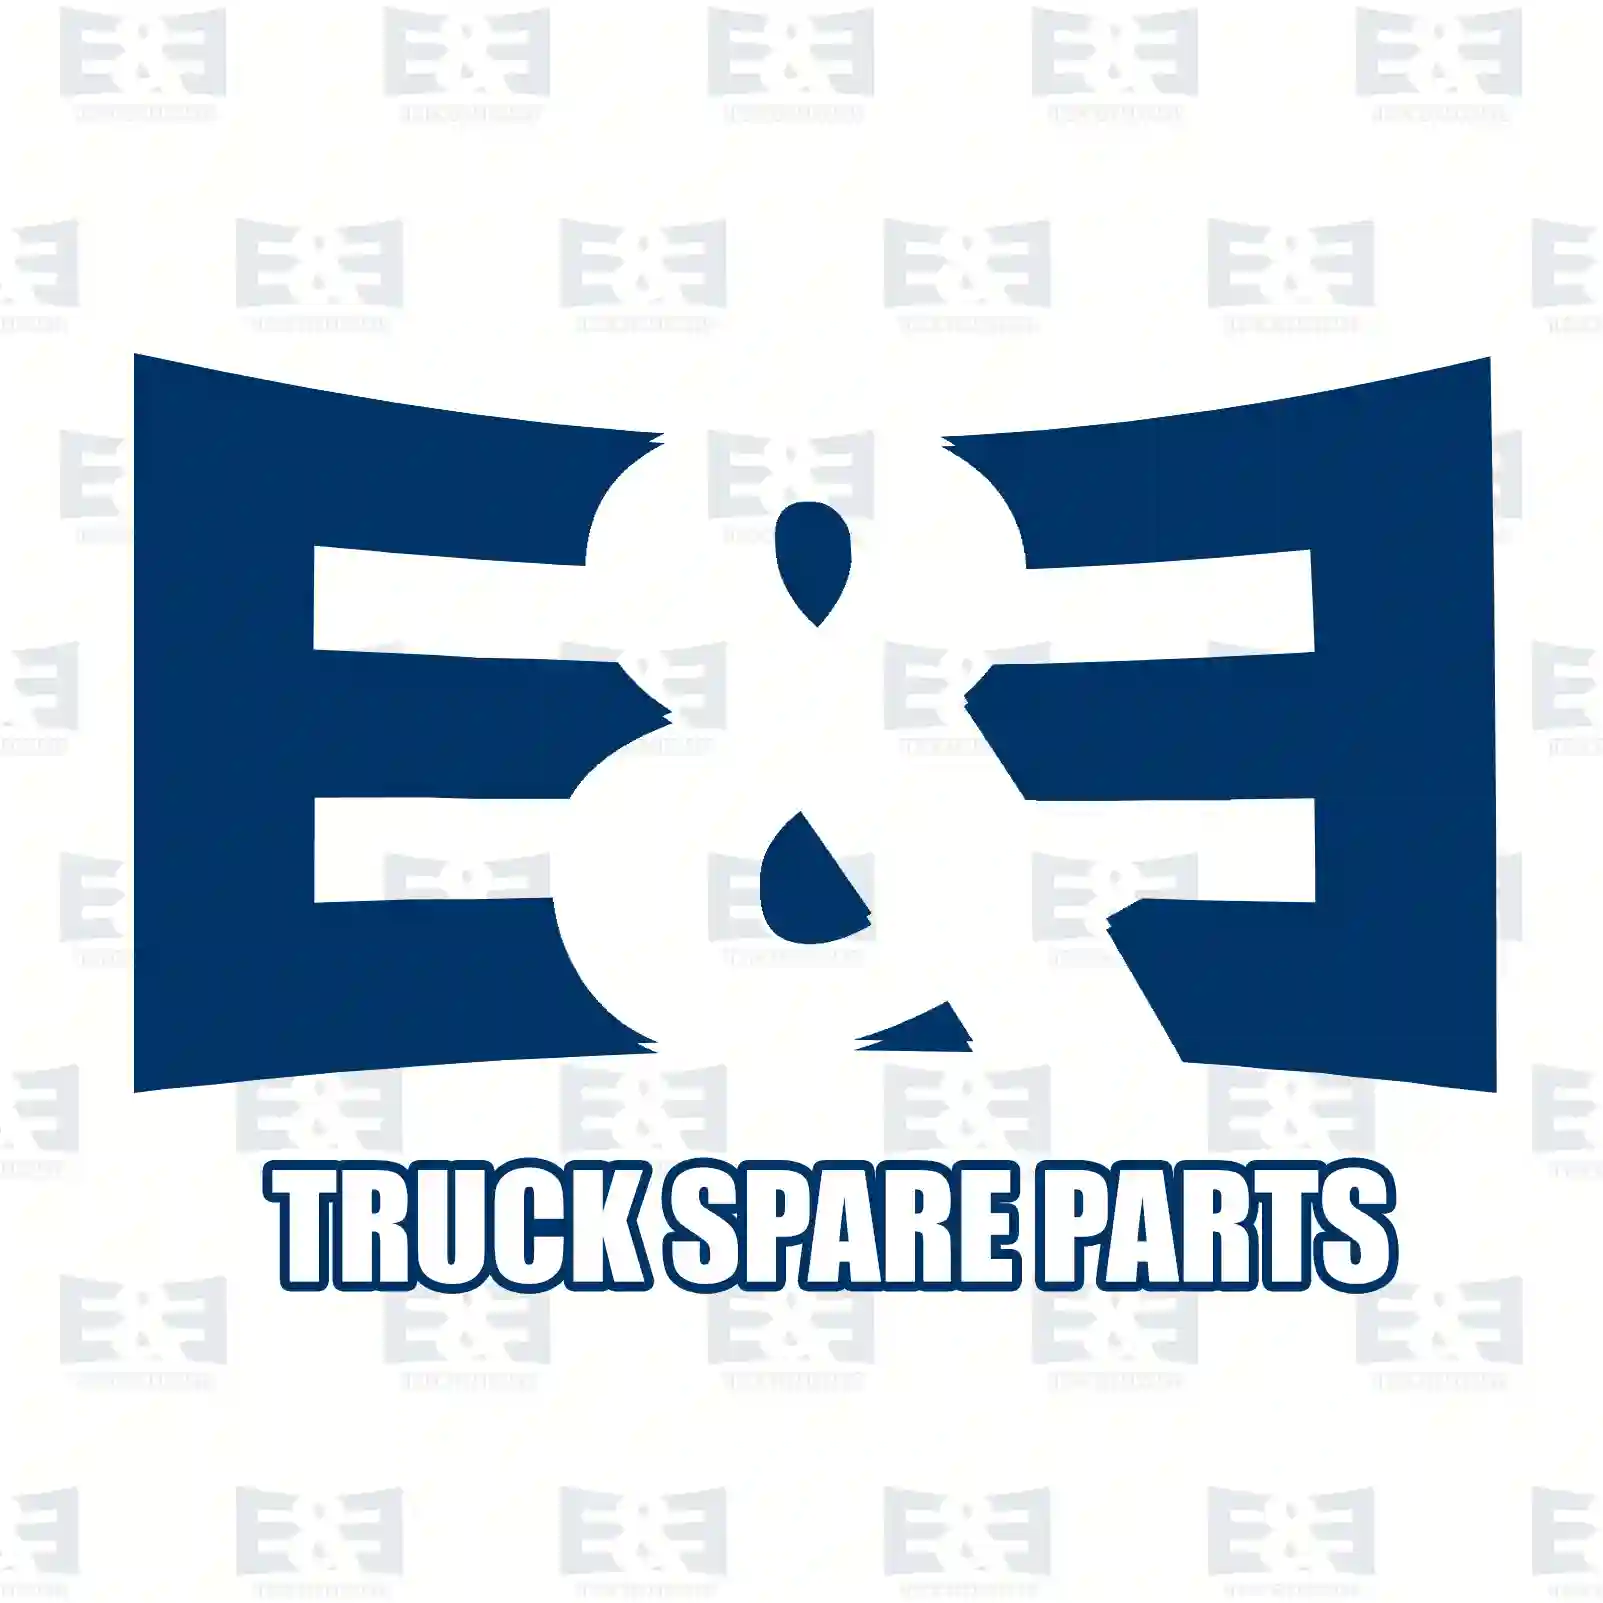  Seal ring, release fork || E&E Truck Spare Parts | Truck Spare Parts, Auotomotive Spare Parts